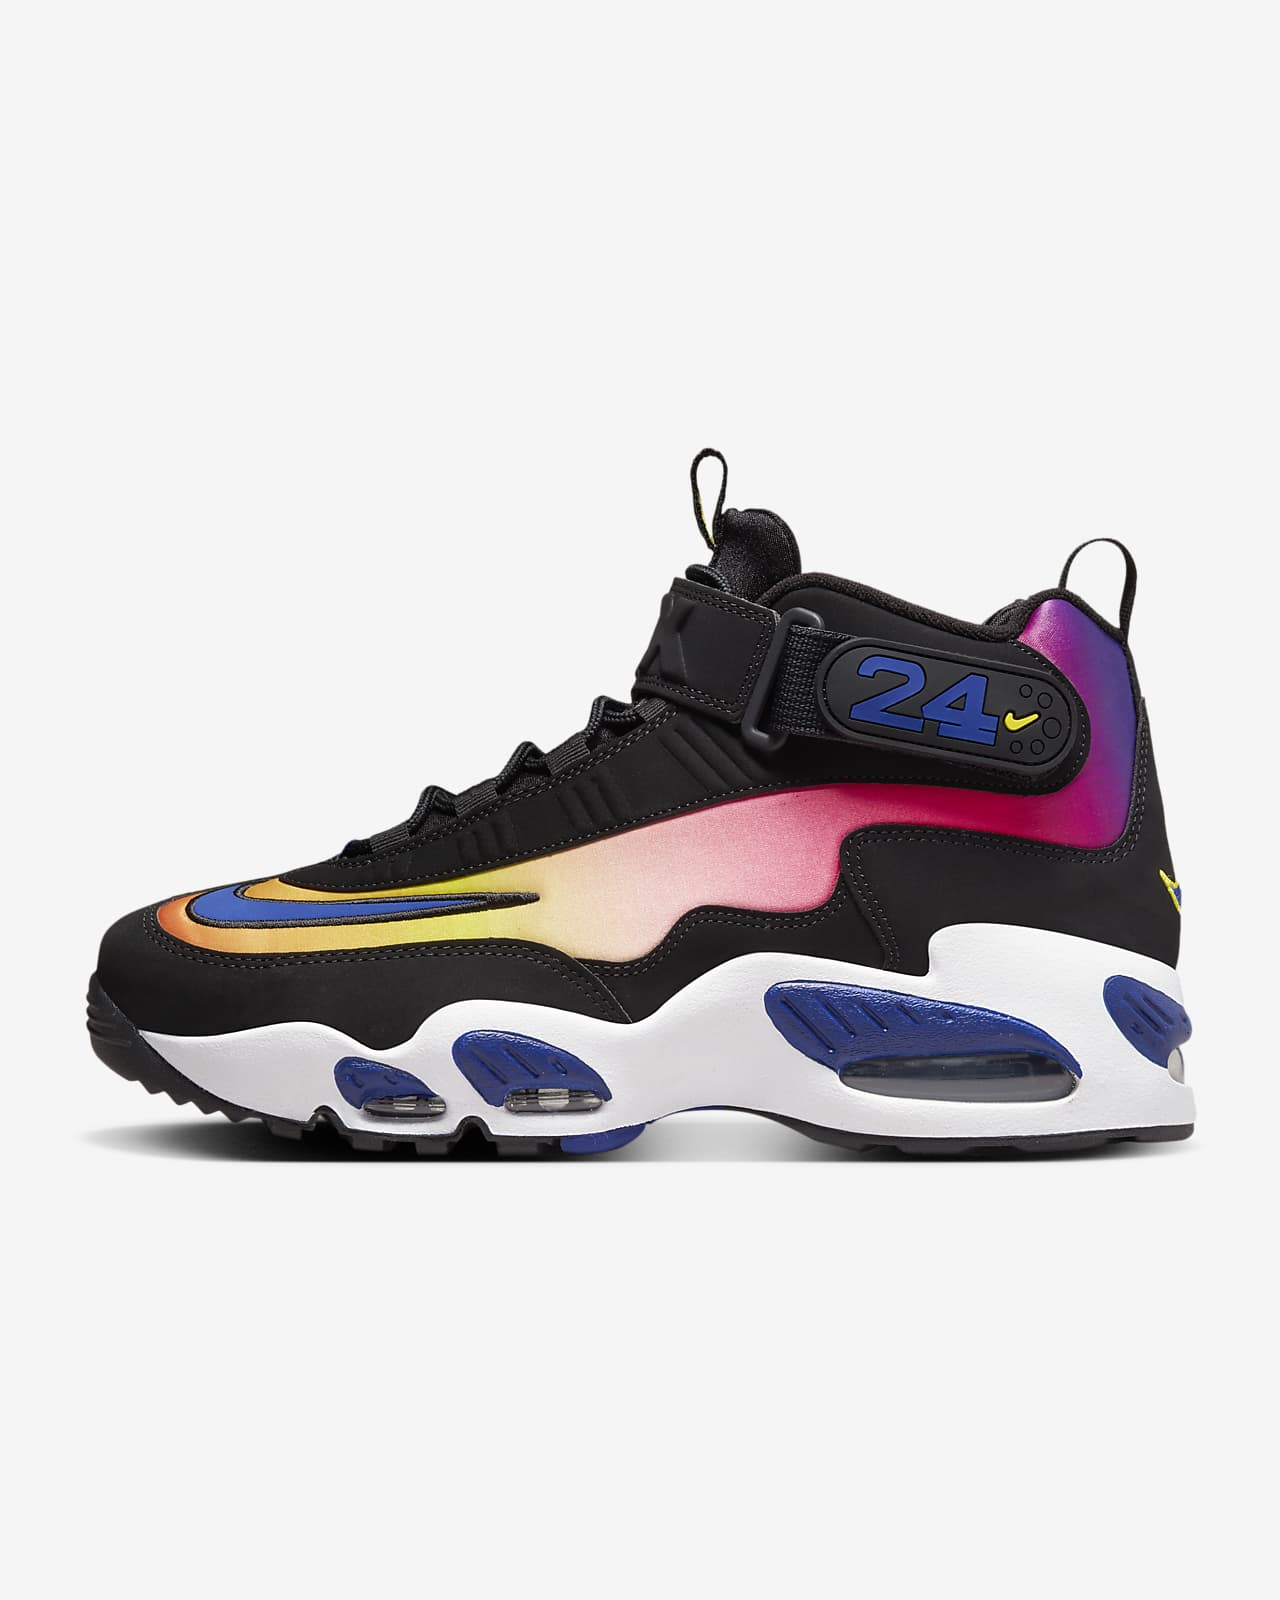 Nike Air Griffey Max 1 Men's Shoes.